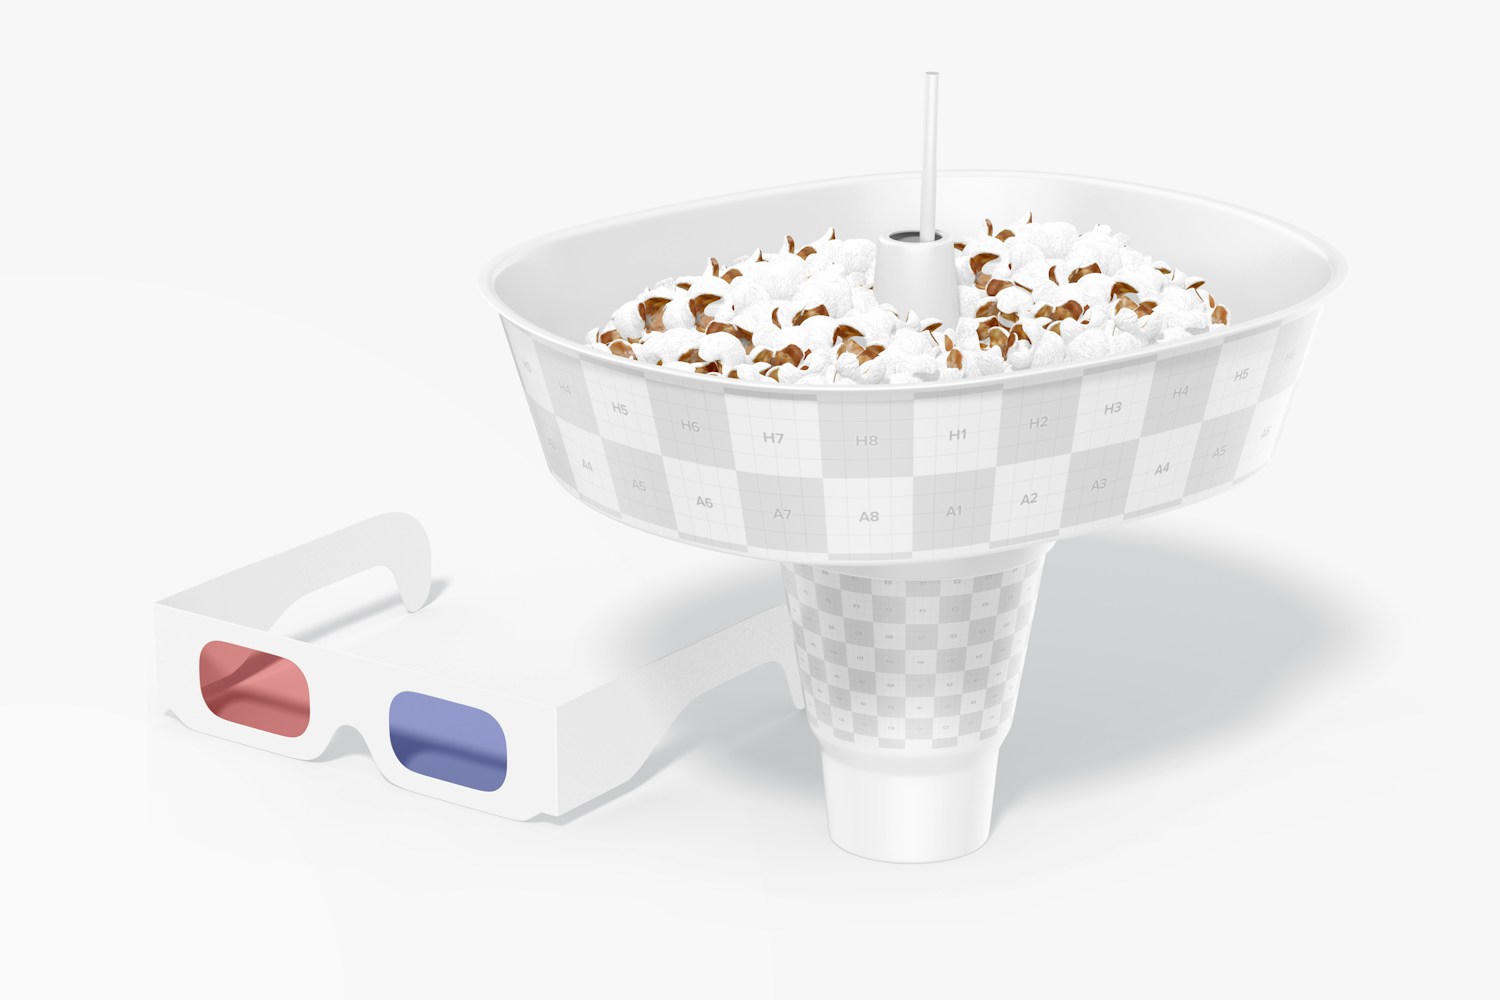 Cup with Oval Tray Mockup, with Glasses